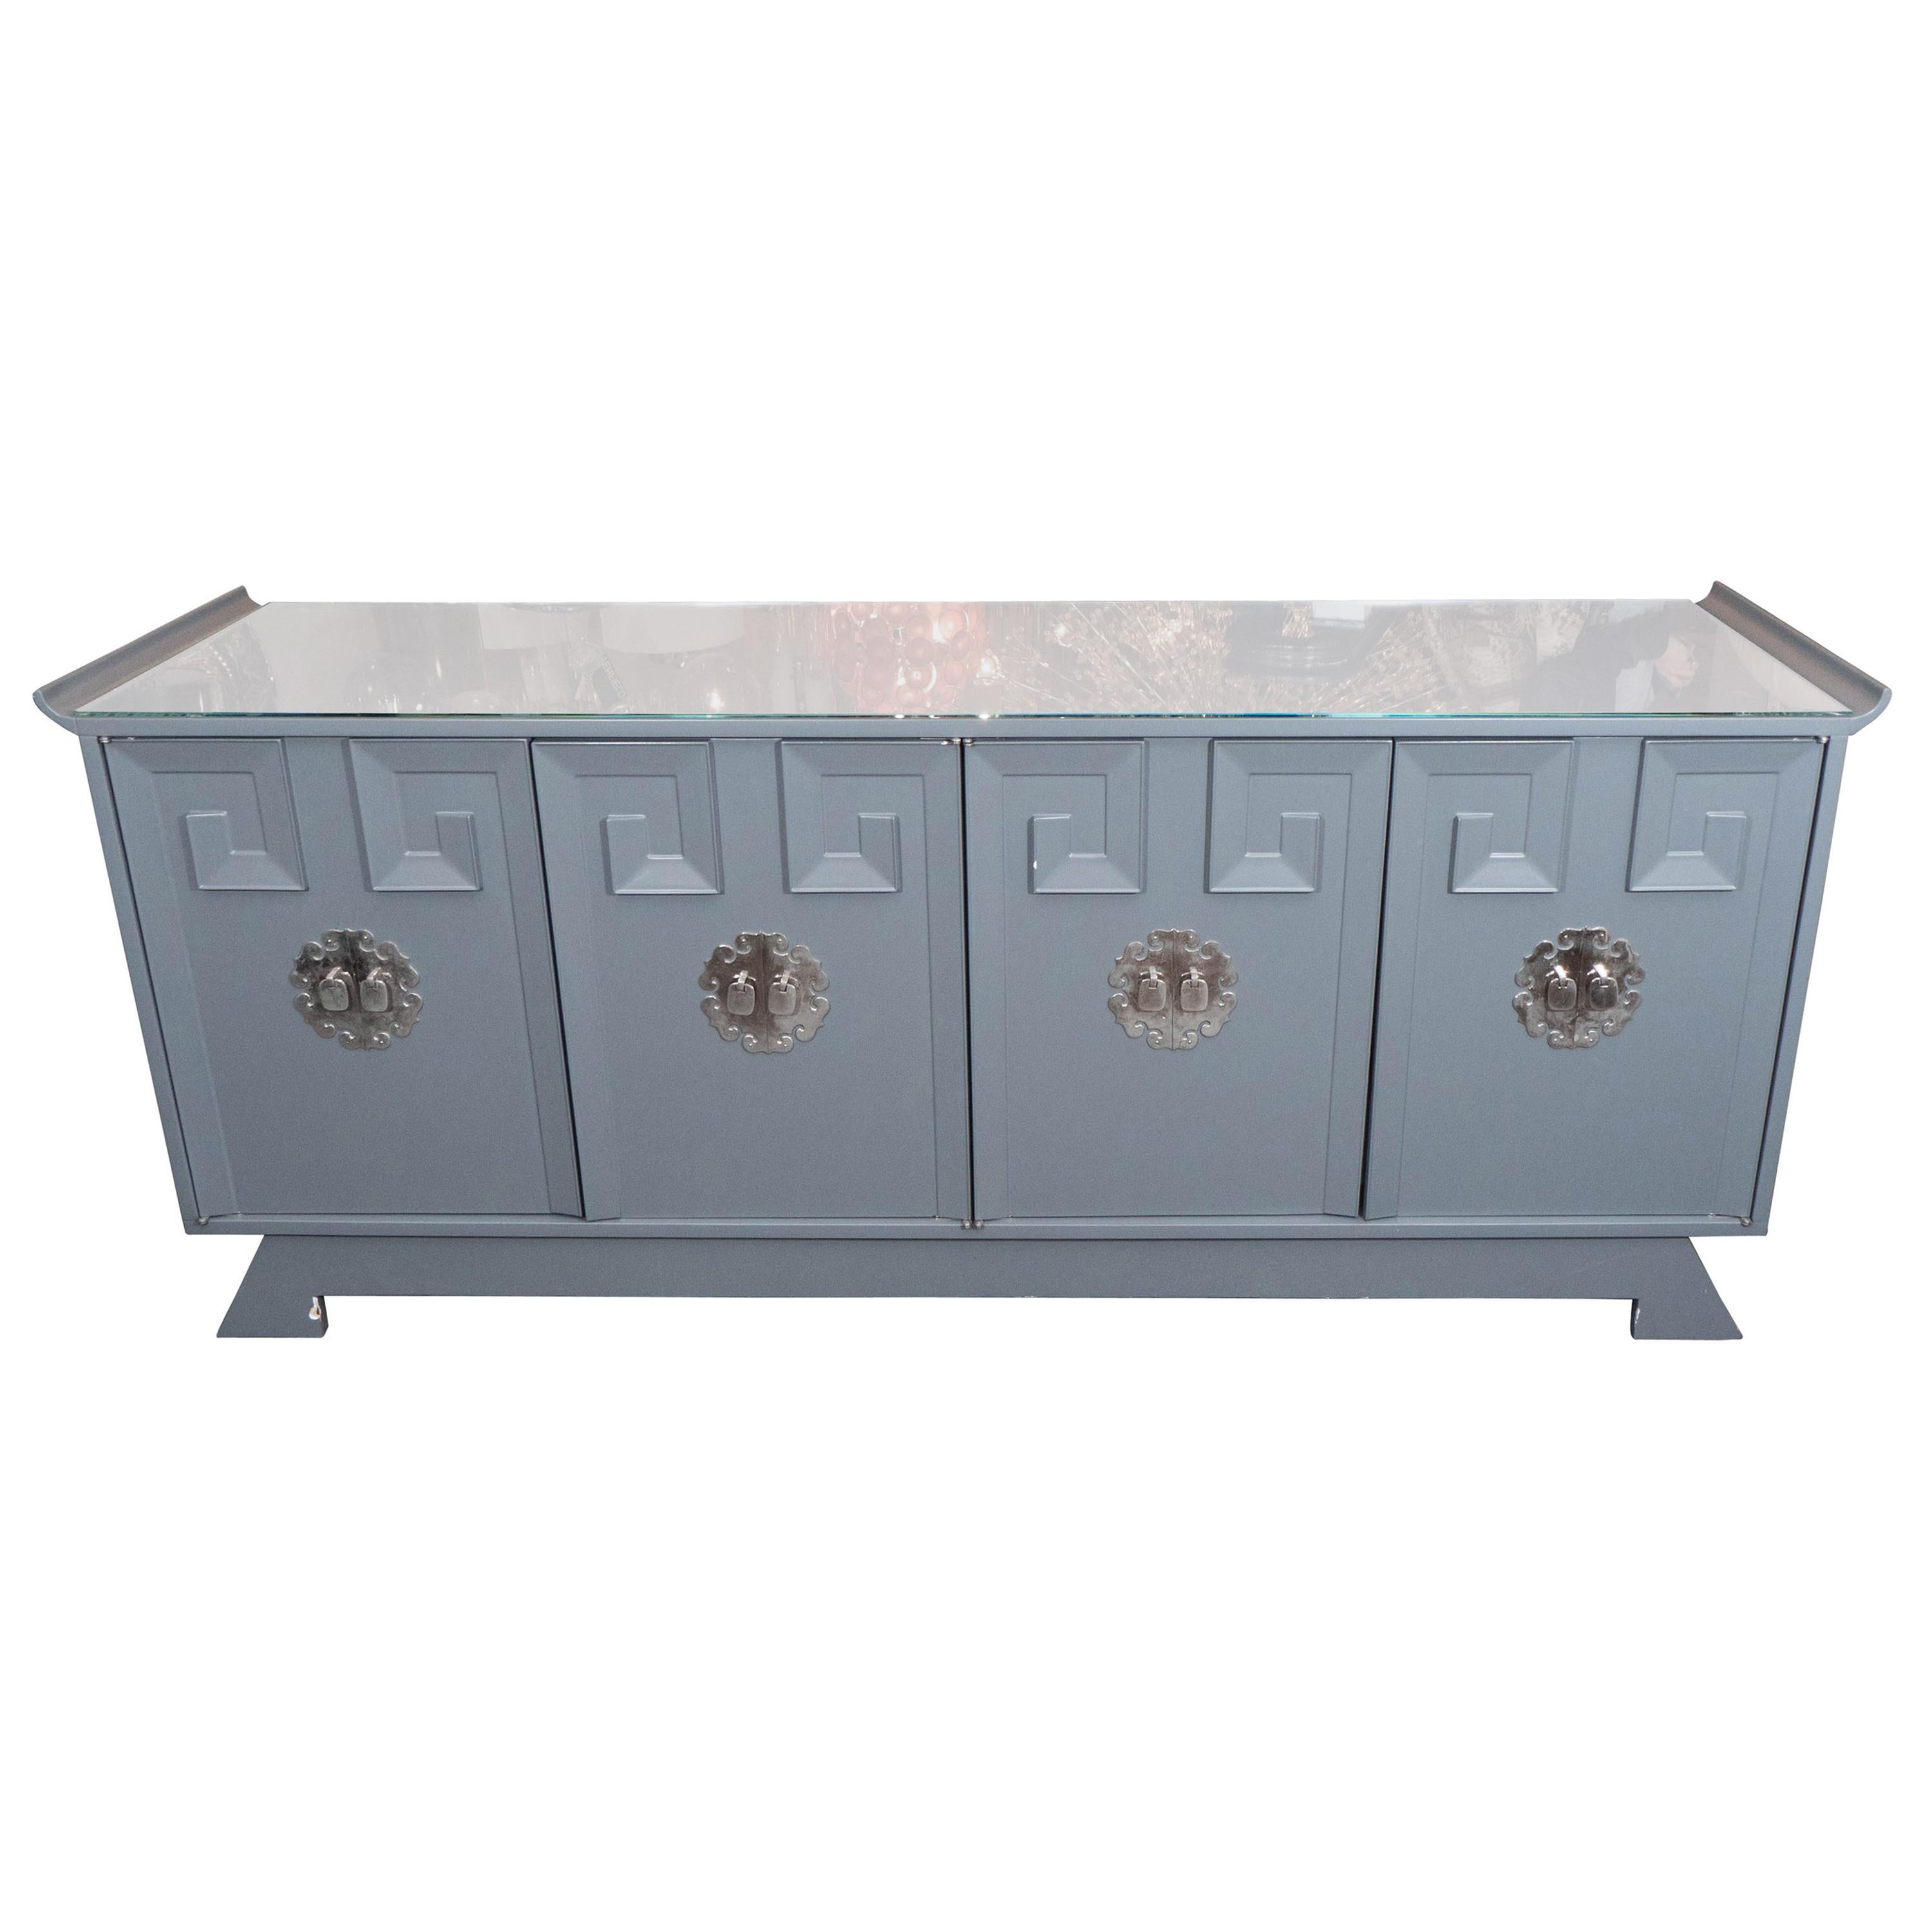 Vintage Grey Satin Lacquer Dresser with Glass Top and Greek Key Detail